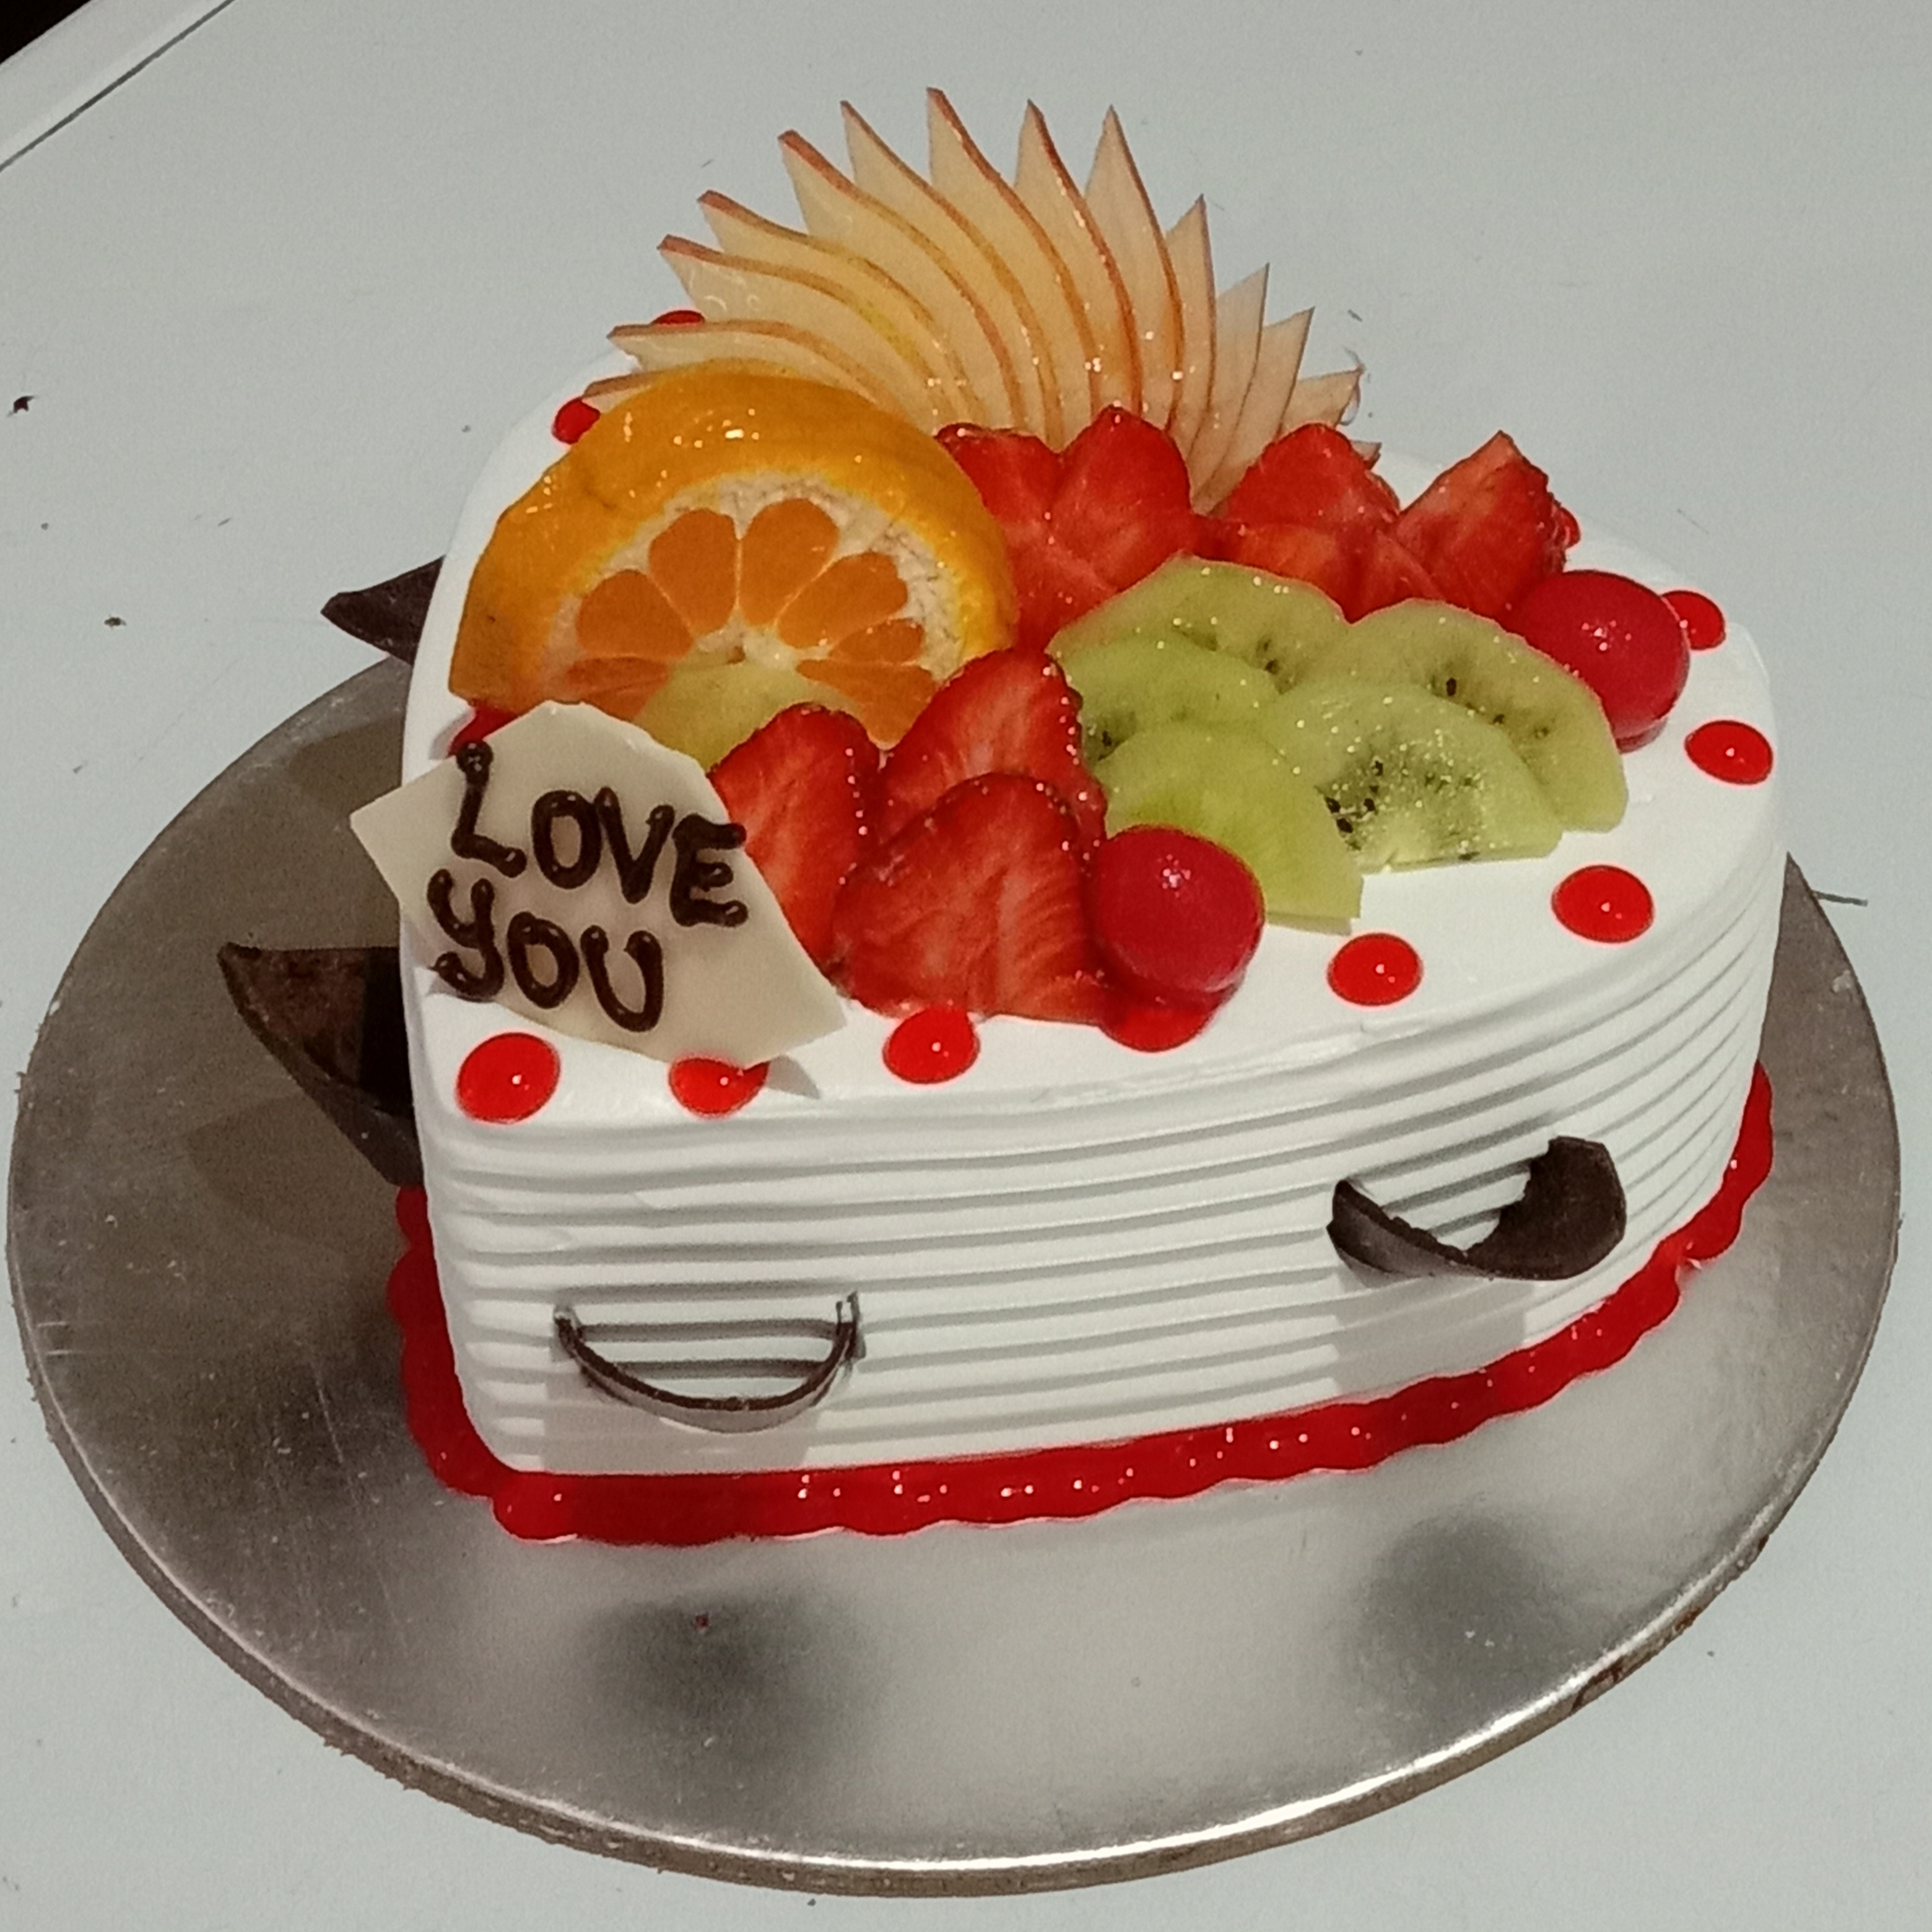 Oren Bakery - 𝑭𝒓𝒆𝒔𝒉 𝑭𝒓𝒖𝒊𝒕 𝑪𝒂𝒌𝒆 Original flavor cake with  lychee and peach filling Decorated with fresh fruit such as strawberries,  kiwi fruits and grapes 🍓🥝🍇 Sprinkle with imported almond grains The